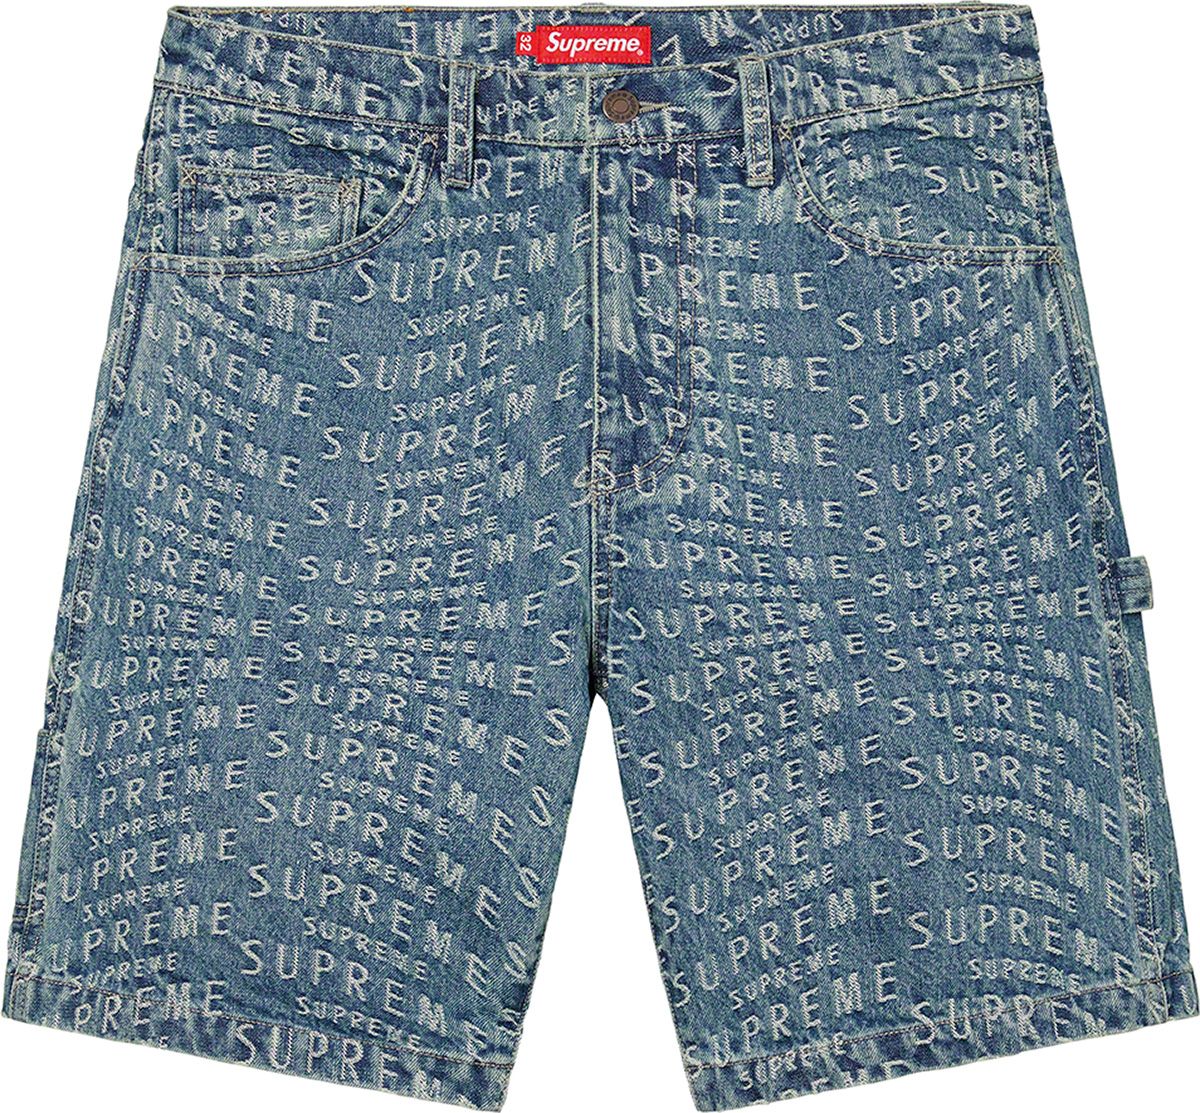 Hurricane Water Short - Spring/Summer 2021 Preview – Supreme